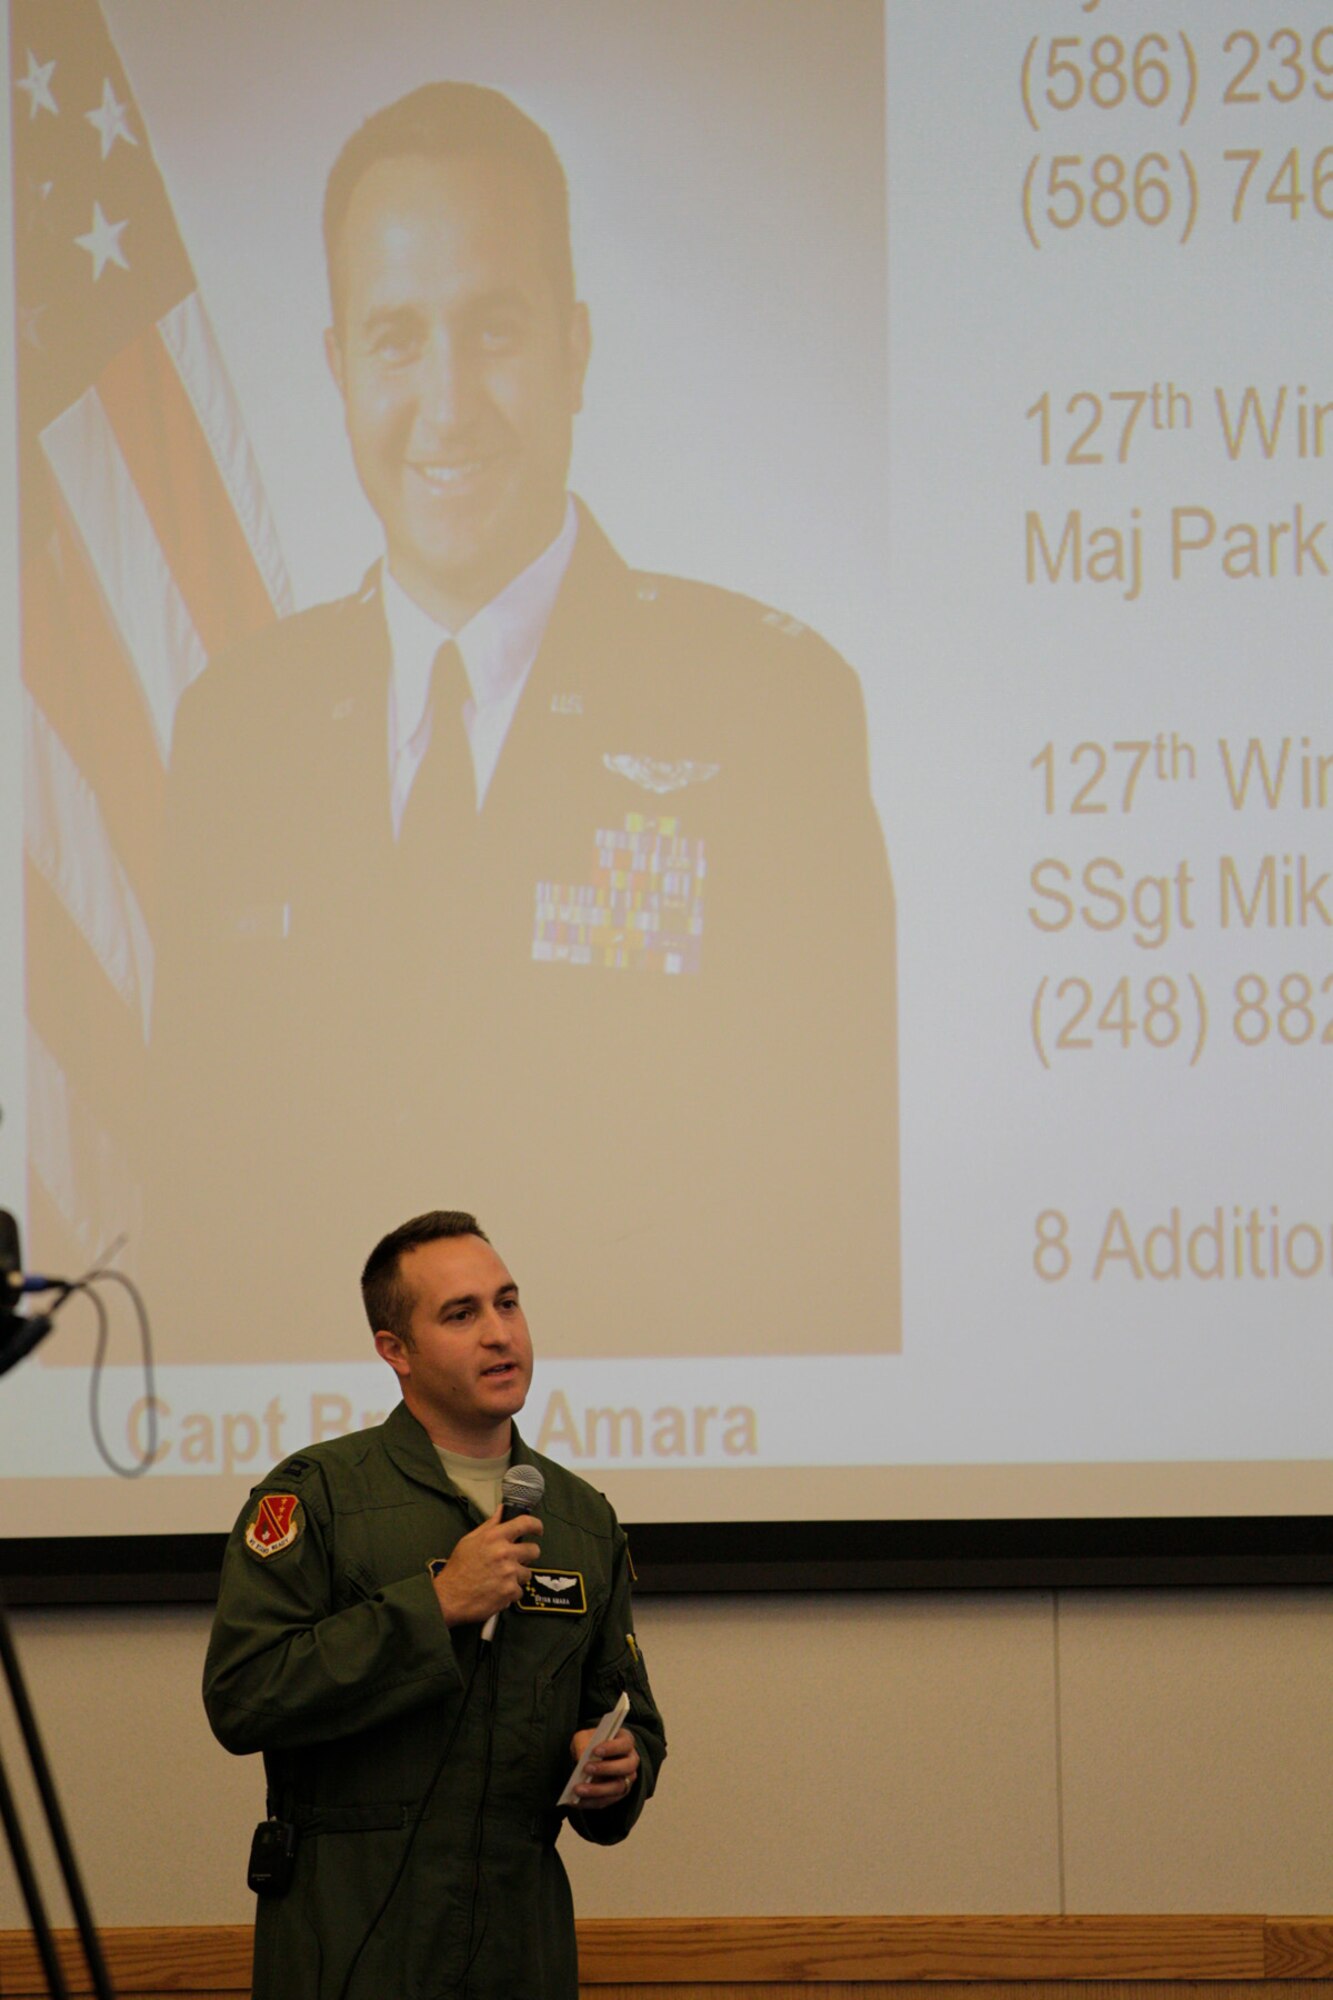 130817-Z-NJ721-021 -- 127th Wing Executive Officer Capt. Bryan Amara conducts Sexual Assault Prevention and Response (SAPR) training at Selfridge Air National Guard Base, Mich., on Saturday, August 17, 2013. The Air Force has made the elimination of sexual assault cases a number one priority. During the training, the 127th Wing commander, Col. Michael Thomas, stated that a "zero tolerance" policy for any sexual harassment or assault exists at Selfridge and within the Wing. (U.S. Air National Guard Photo by Tech Sgt. Robert Hanet/Released)